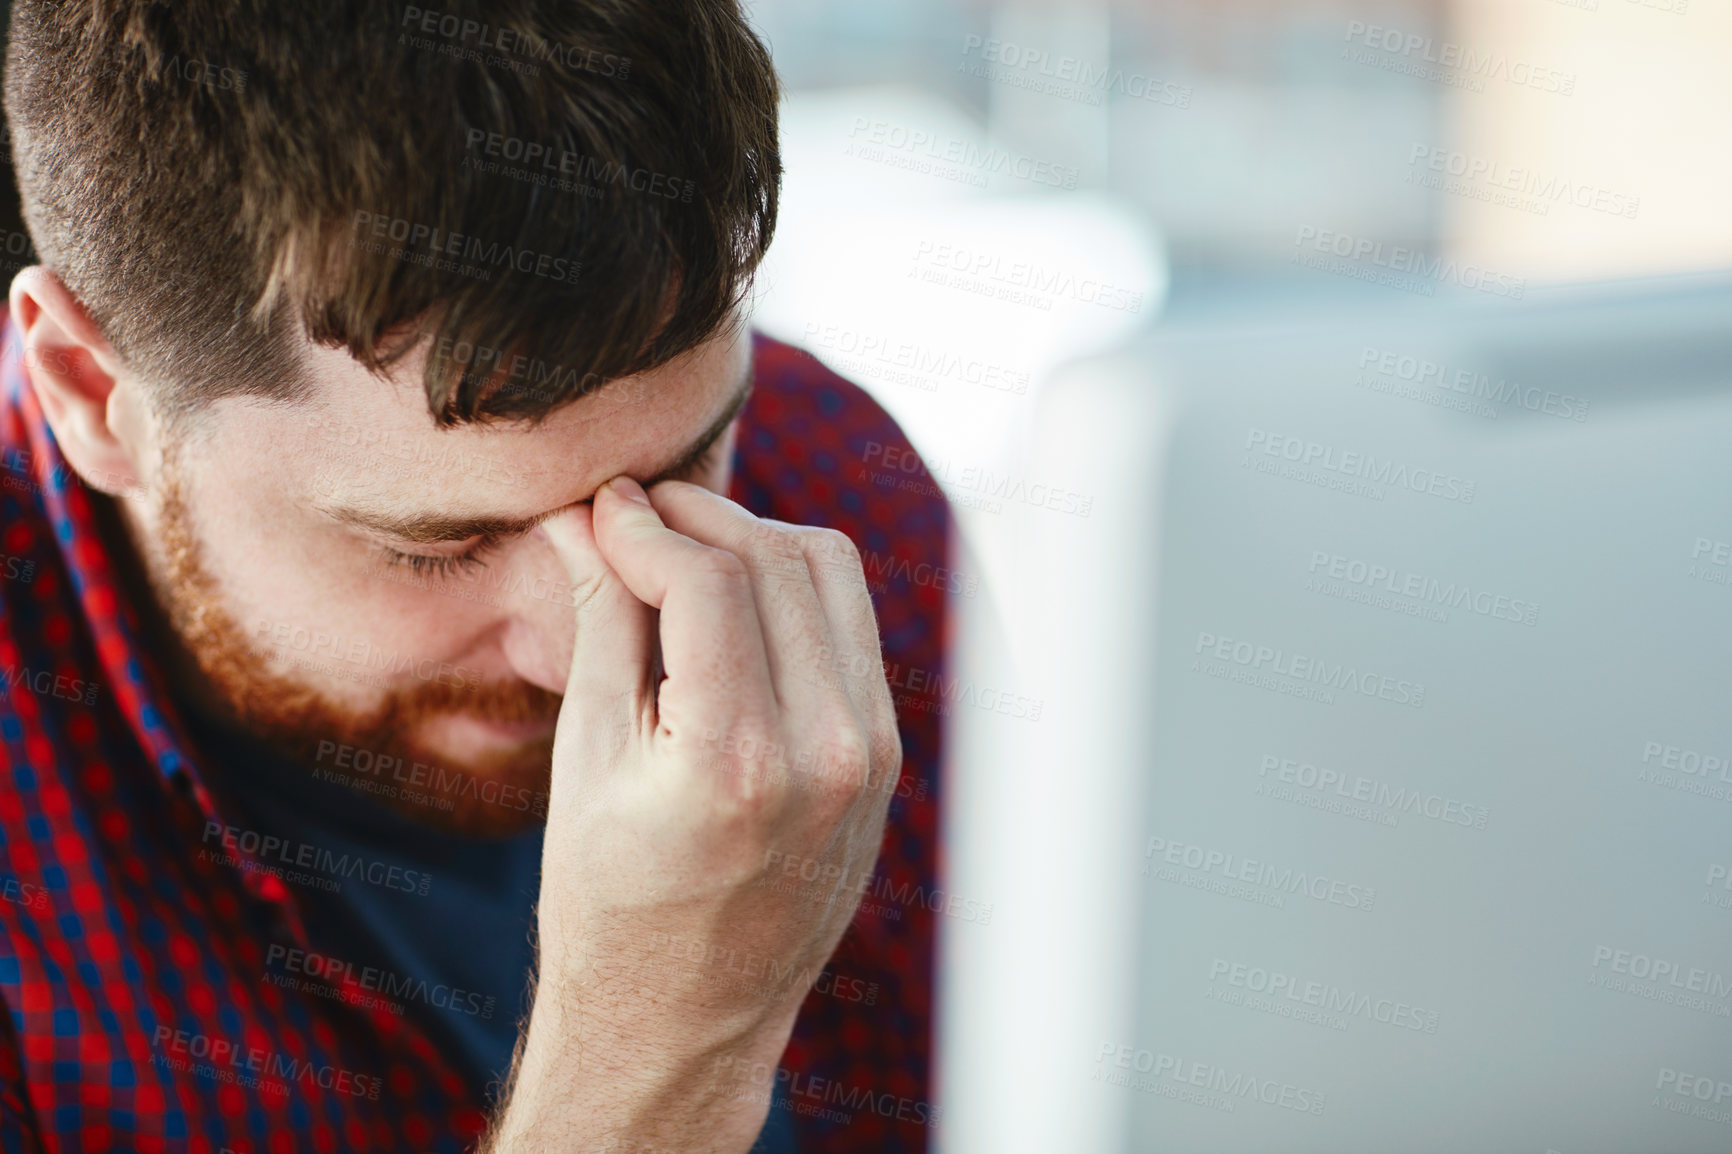 Buy stock photo High angle shot of a young male designer looking stressed in the office